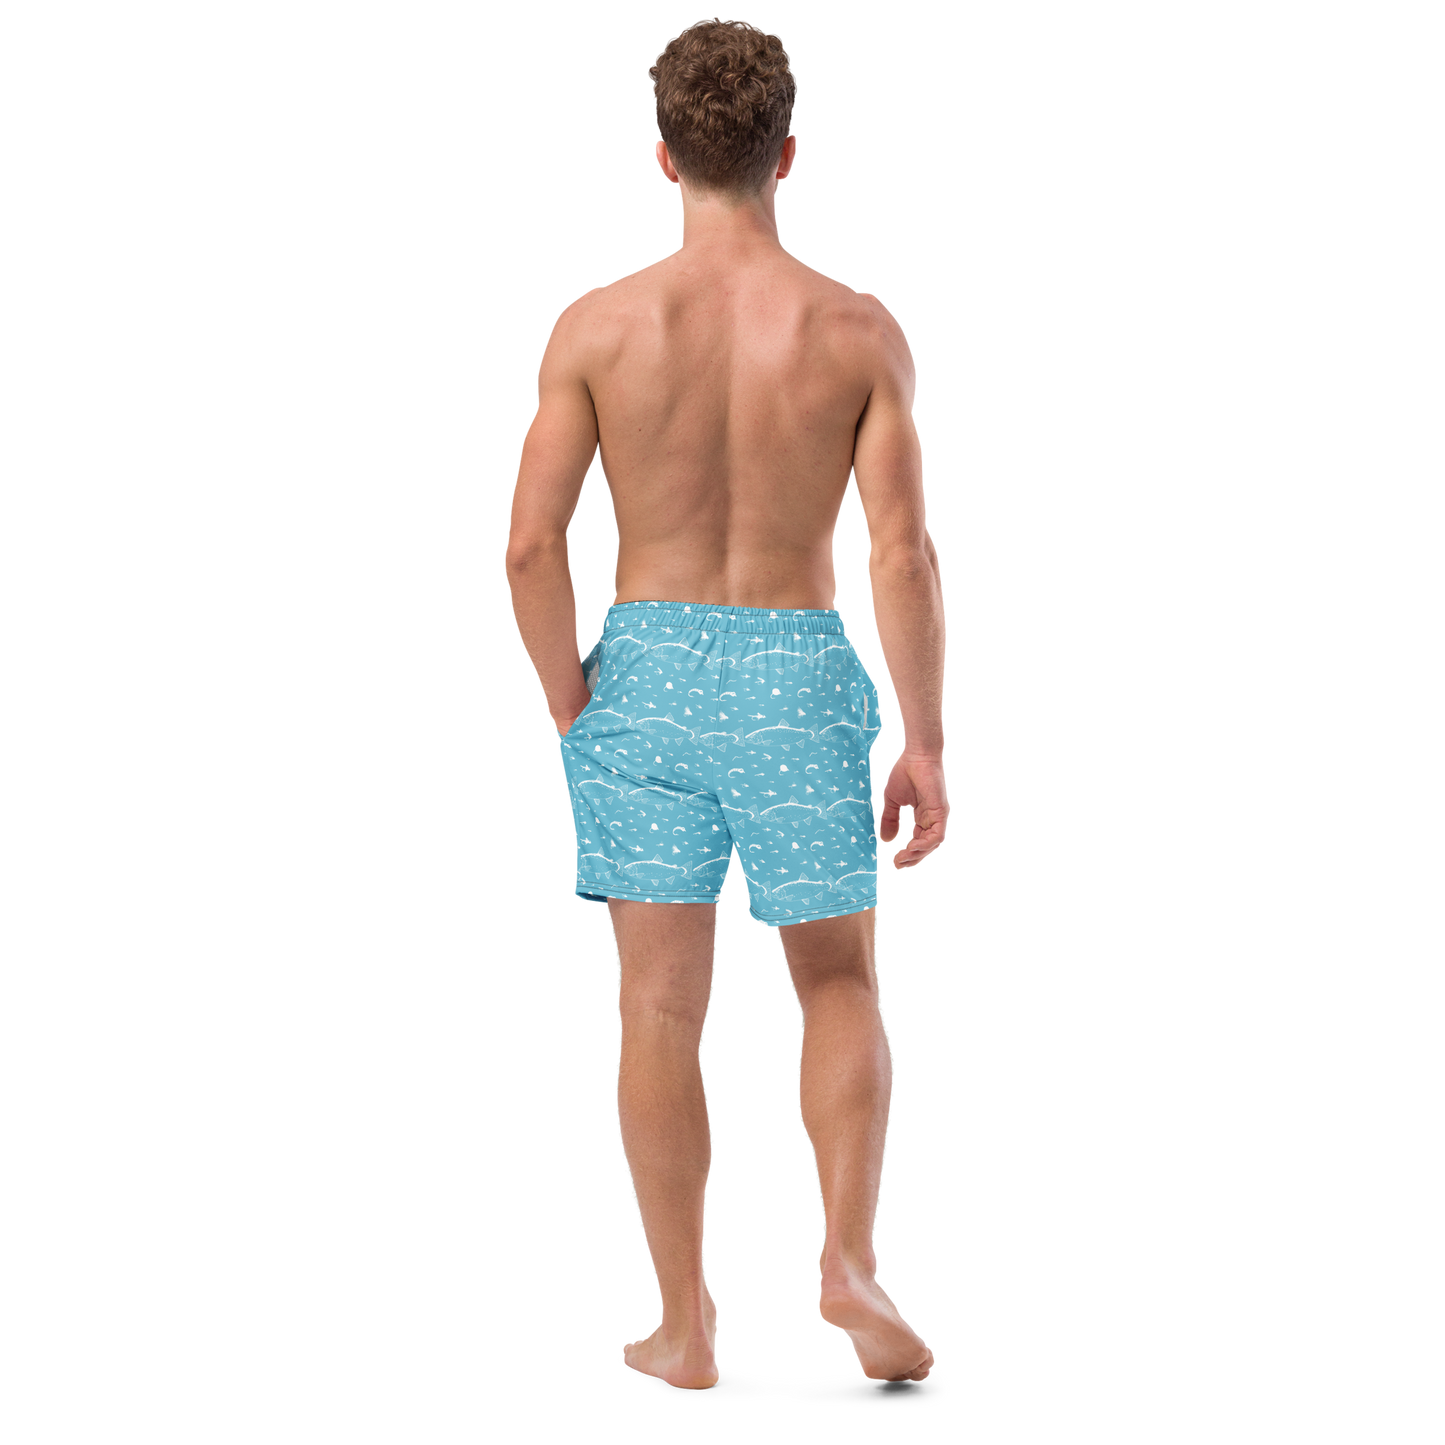 Blue fly fishing shorts / swim trunks. They have a pattern with trout and flies. Back side of model wearing shorts